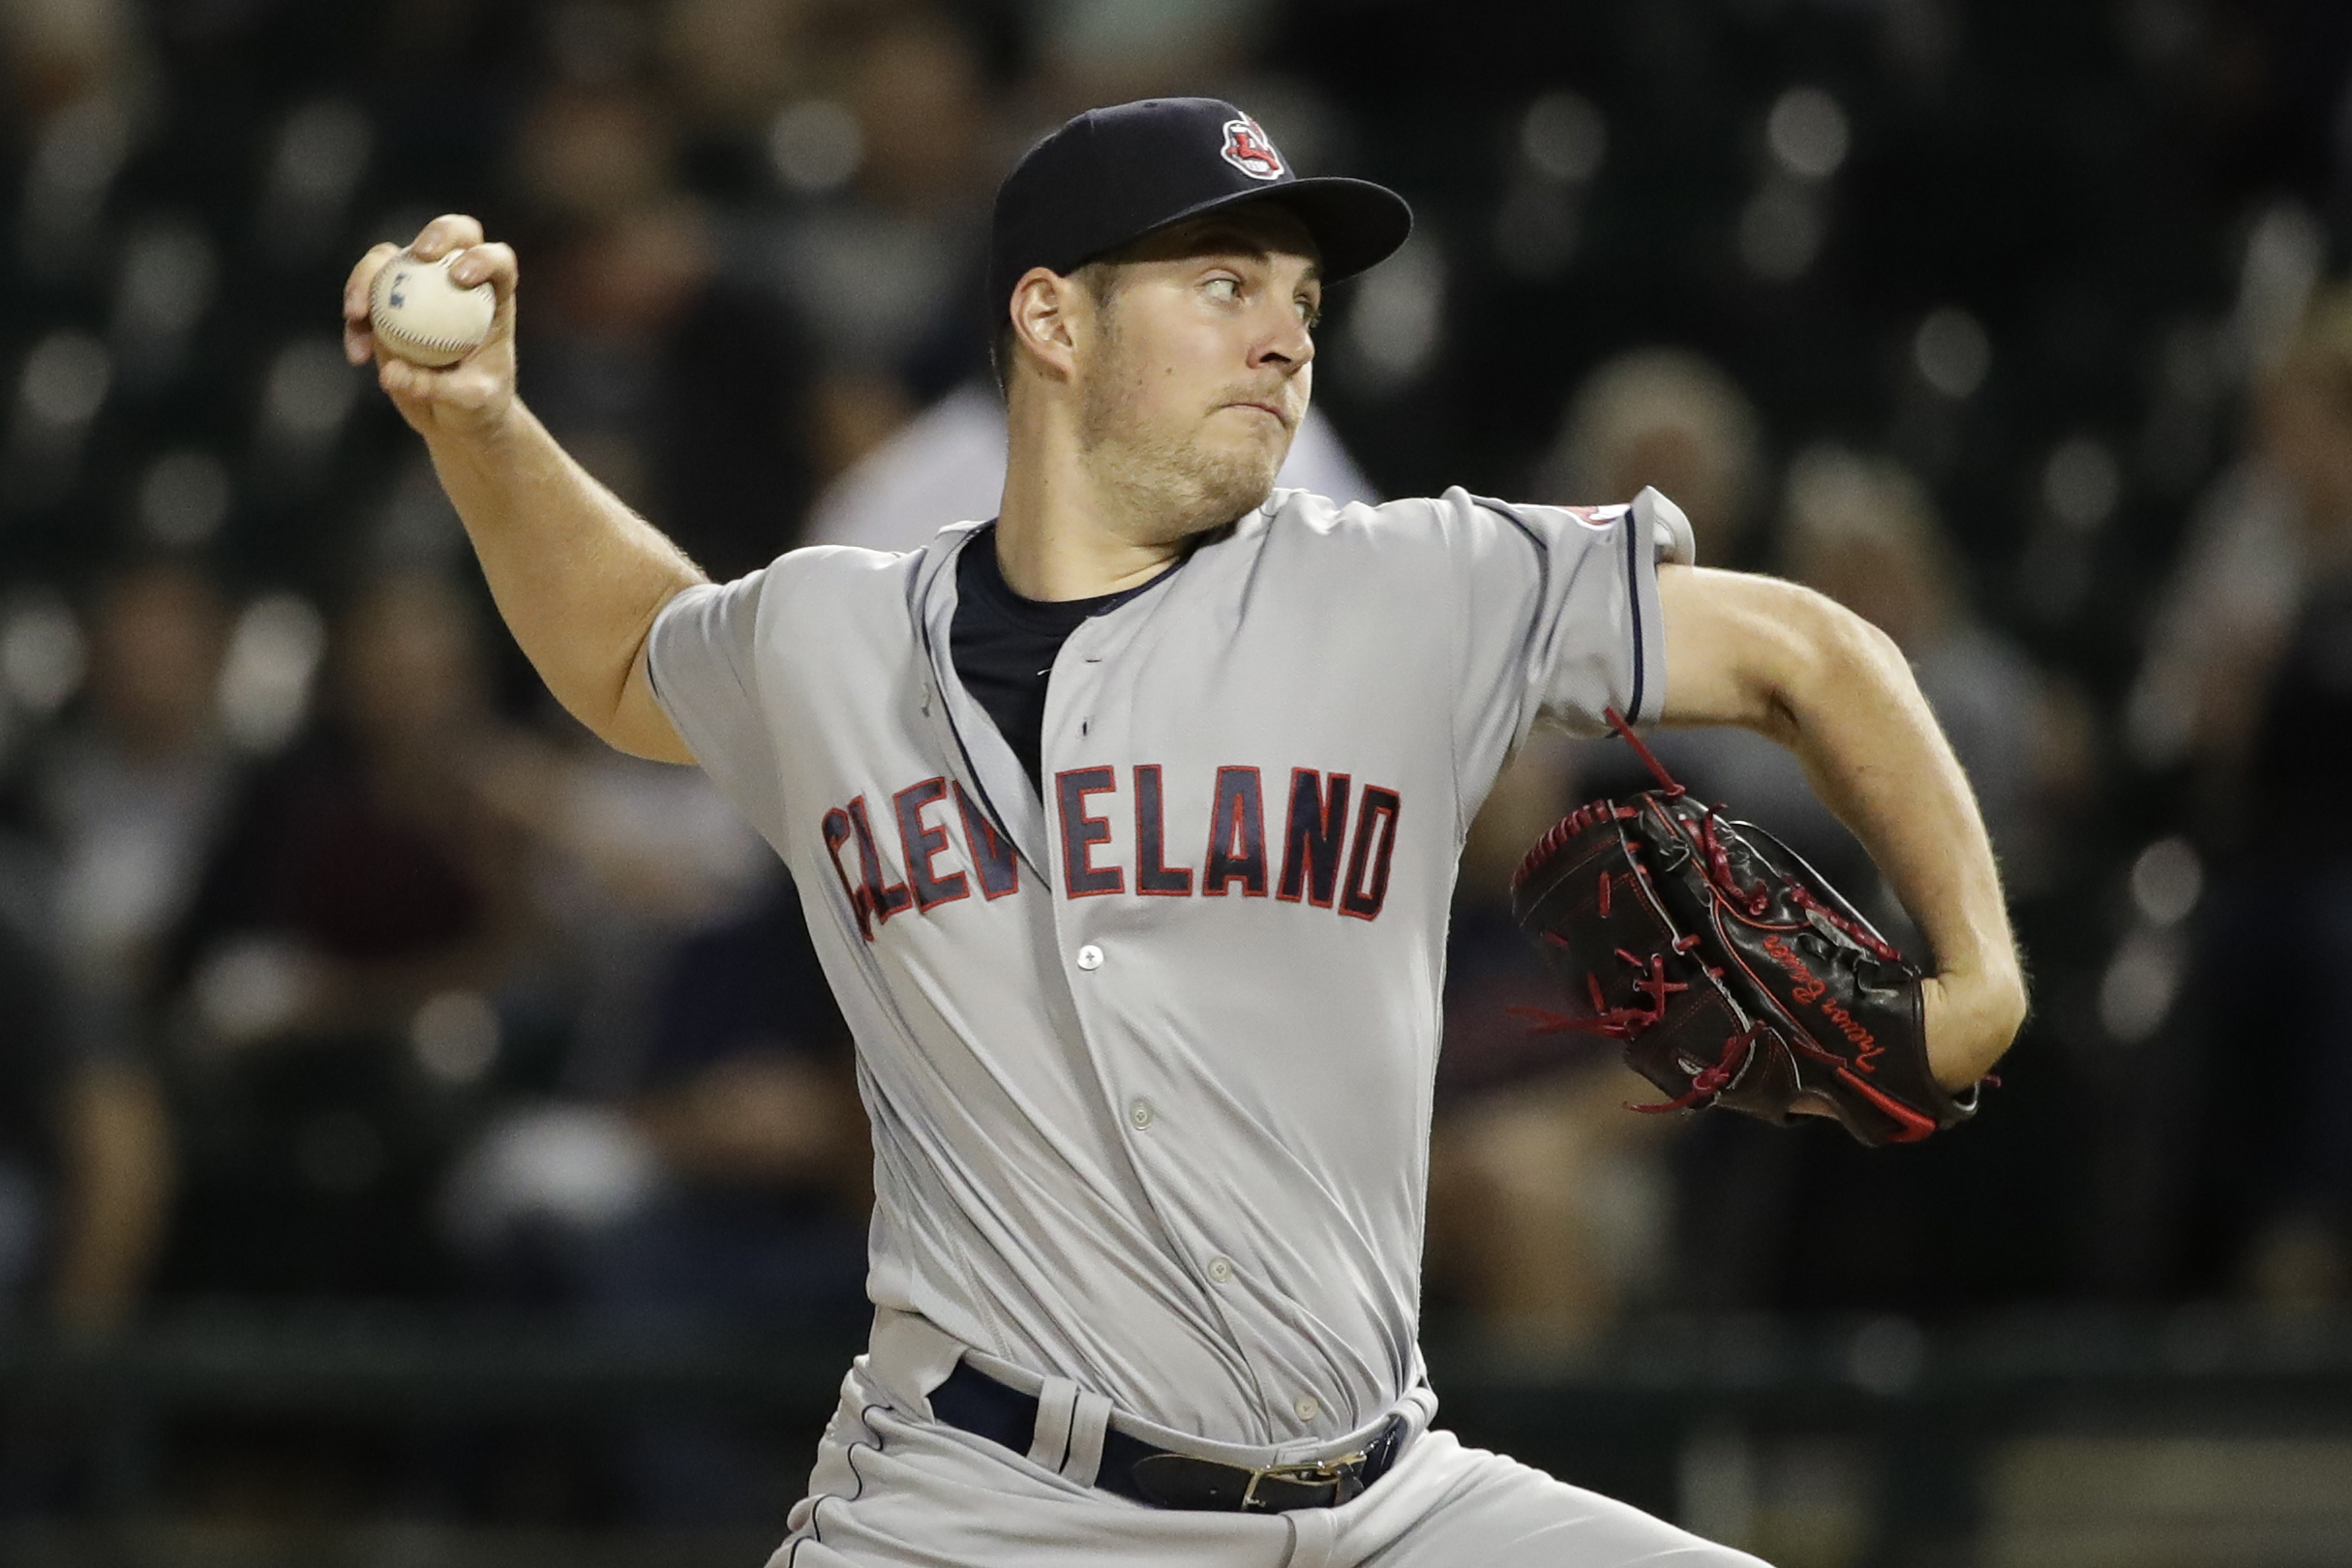 Indians' Trevor Bauer: 'I'd say that was a bad pitch